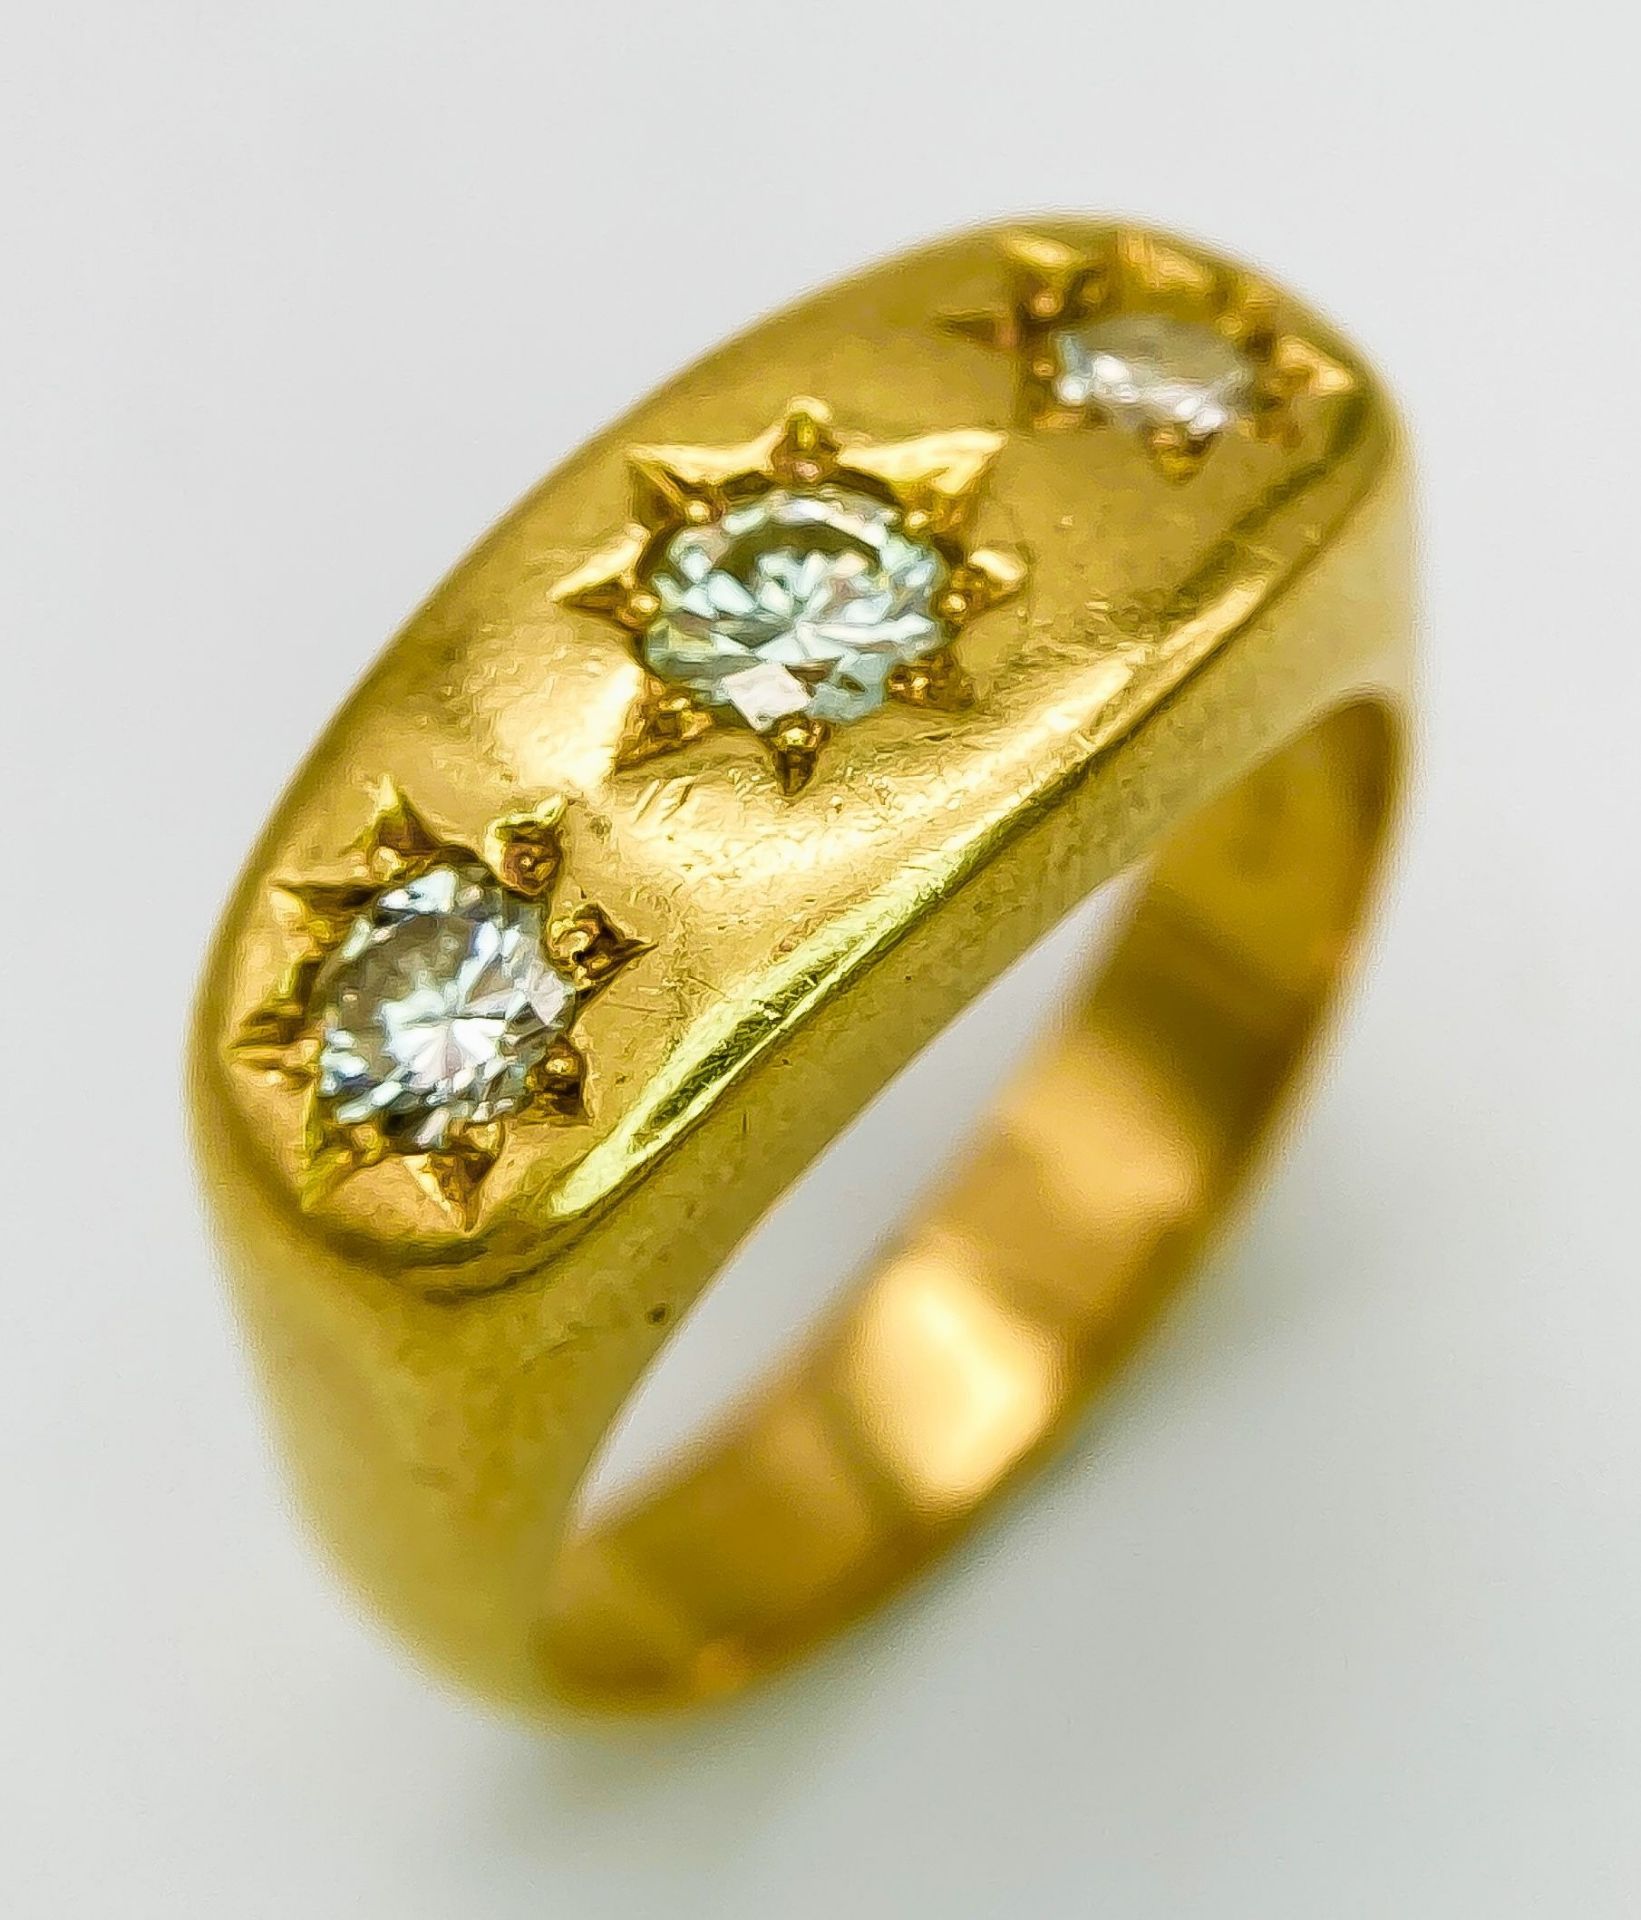 A Vintage 18K Yellow Gold Three Diamond Gypsy Ring. 1ctw. Size U/V. 16.2g total weight. - Image 2 of 5